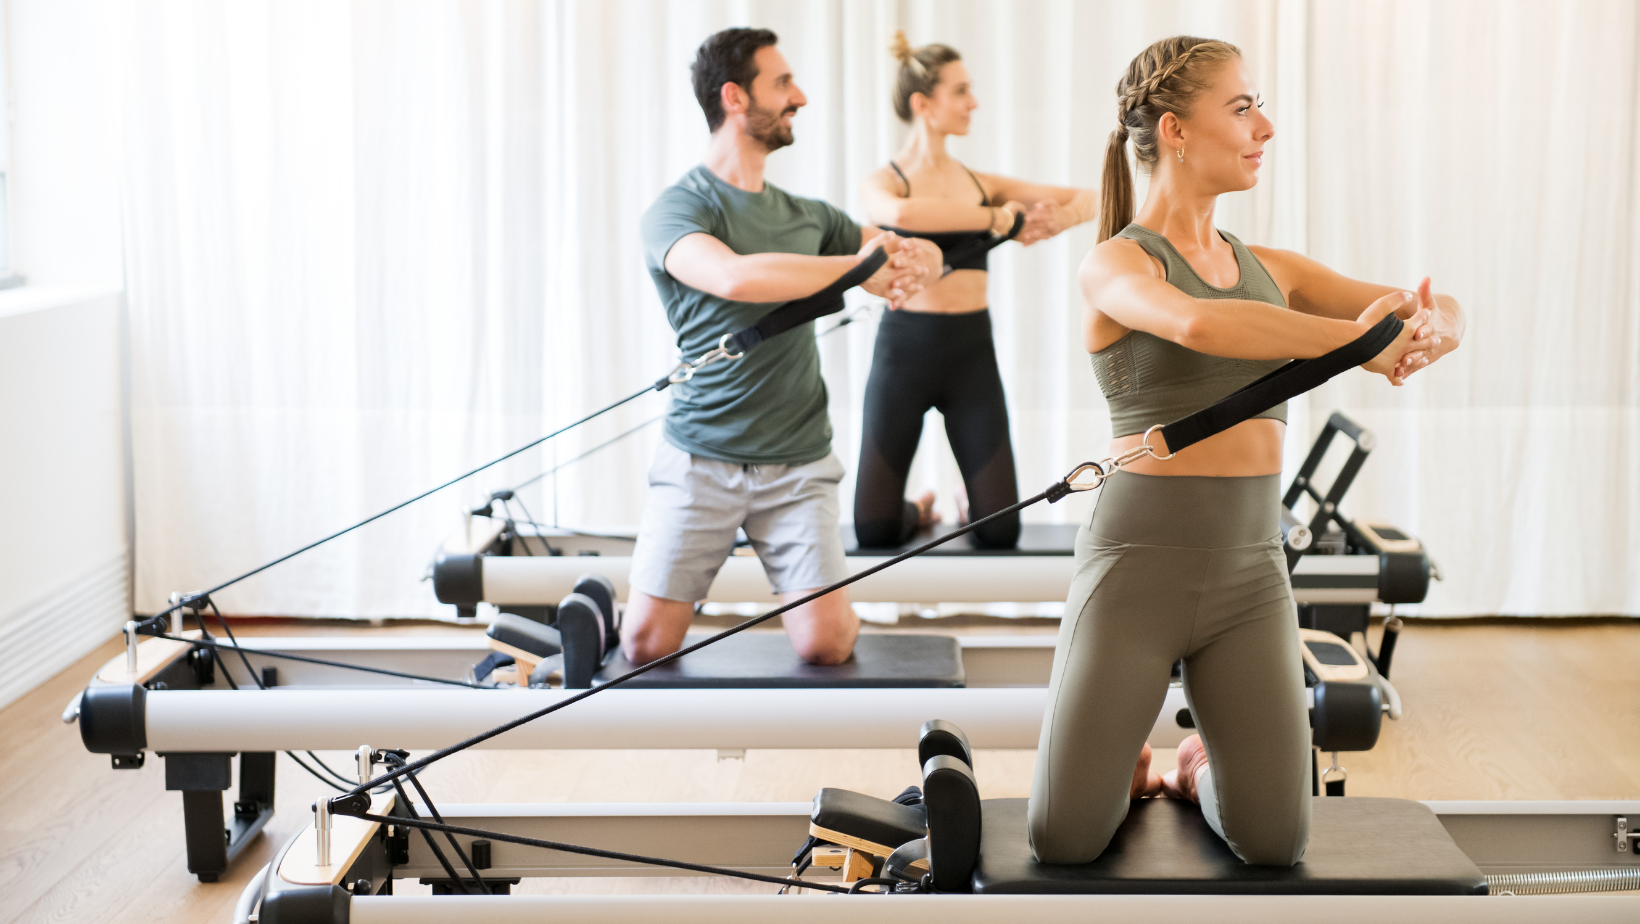 A group of pilates instructors teaching a class